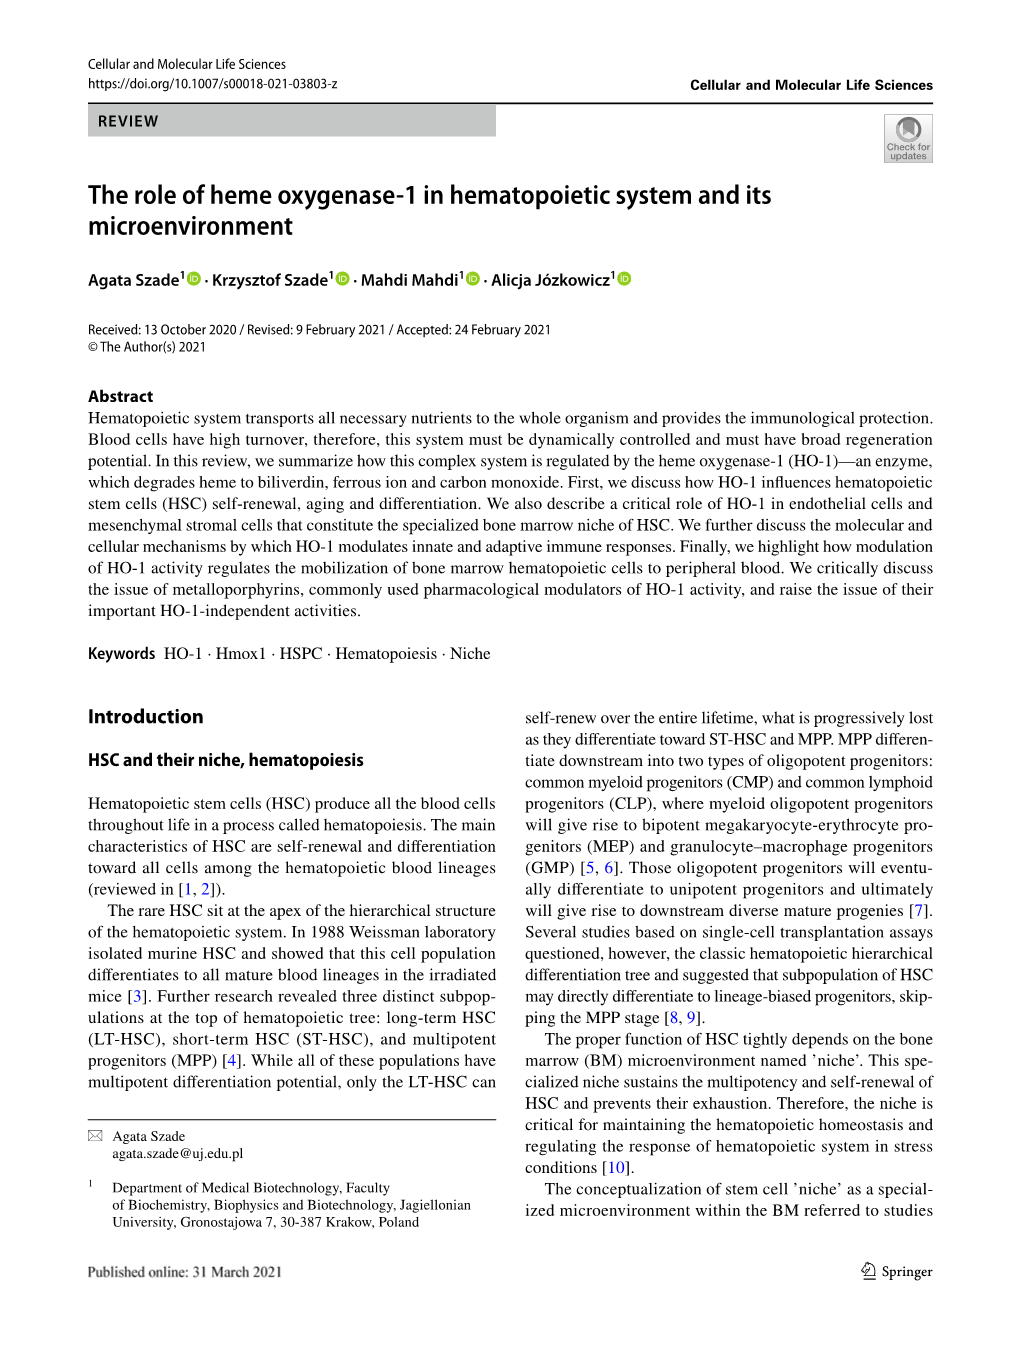 The Role of Heme Oxygenase-1 in Hematopoietic System and Its